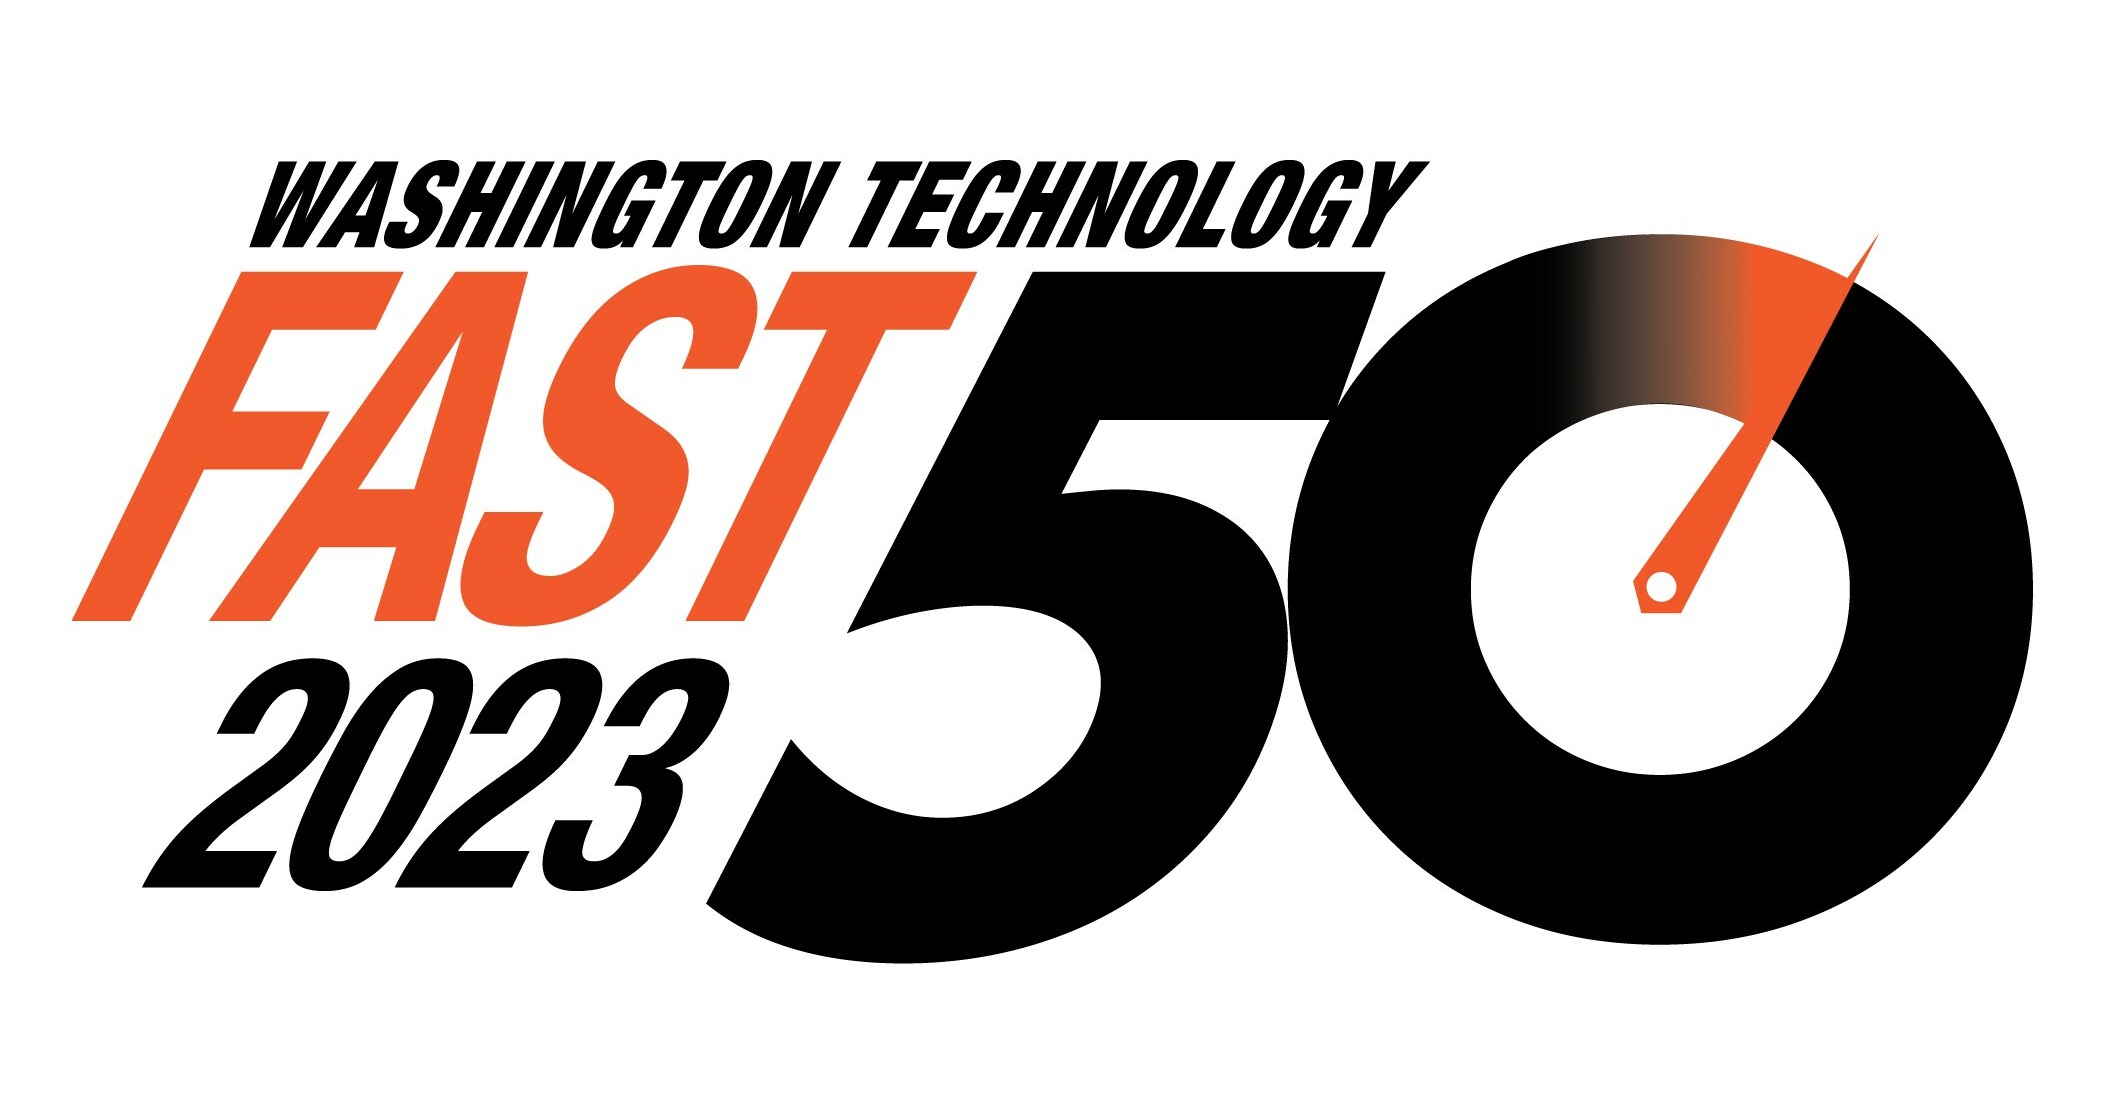 BreakPoint Labs Named to 2023 Washington Technology Fast 50 List